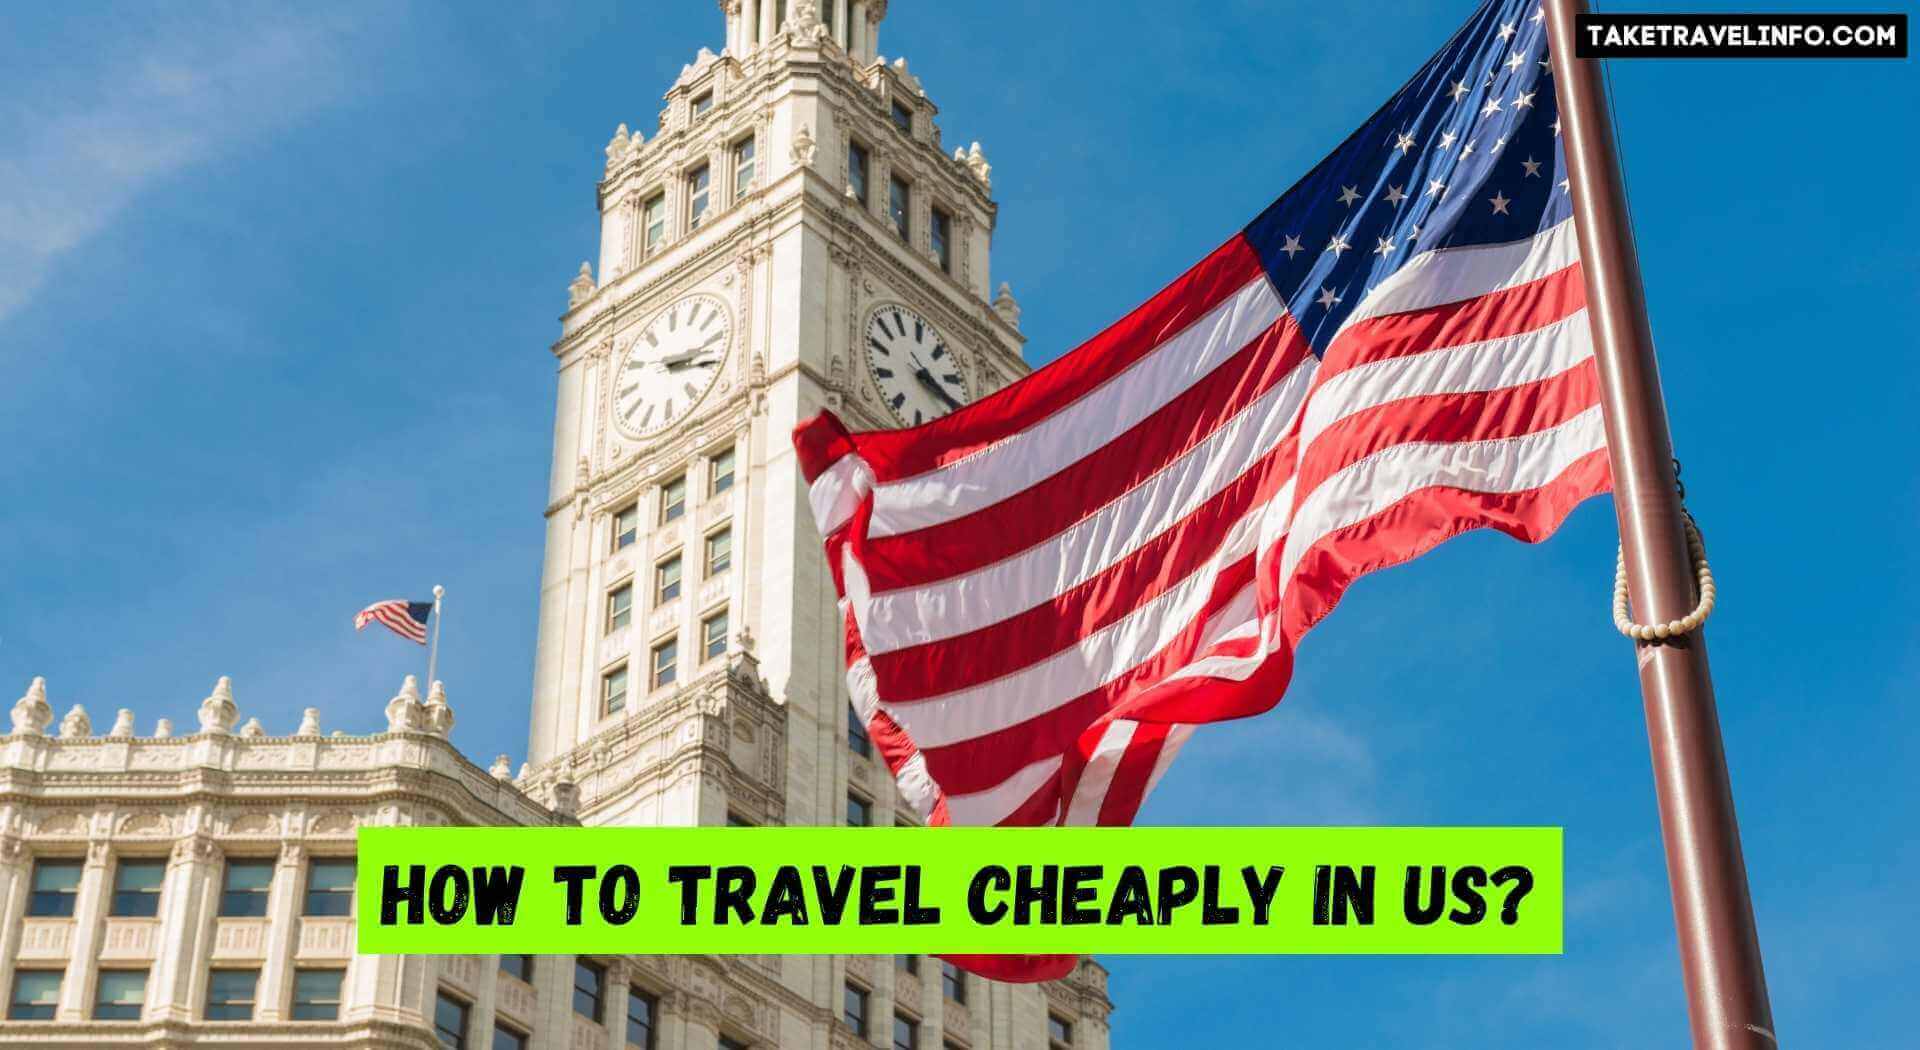 How to Travel Cheaply in Us?